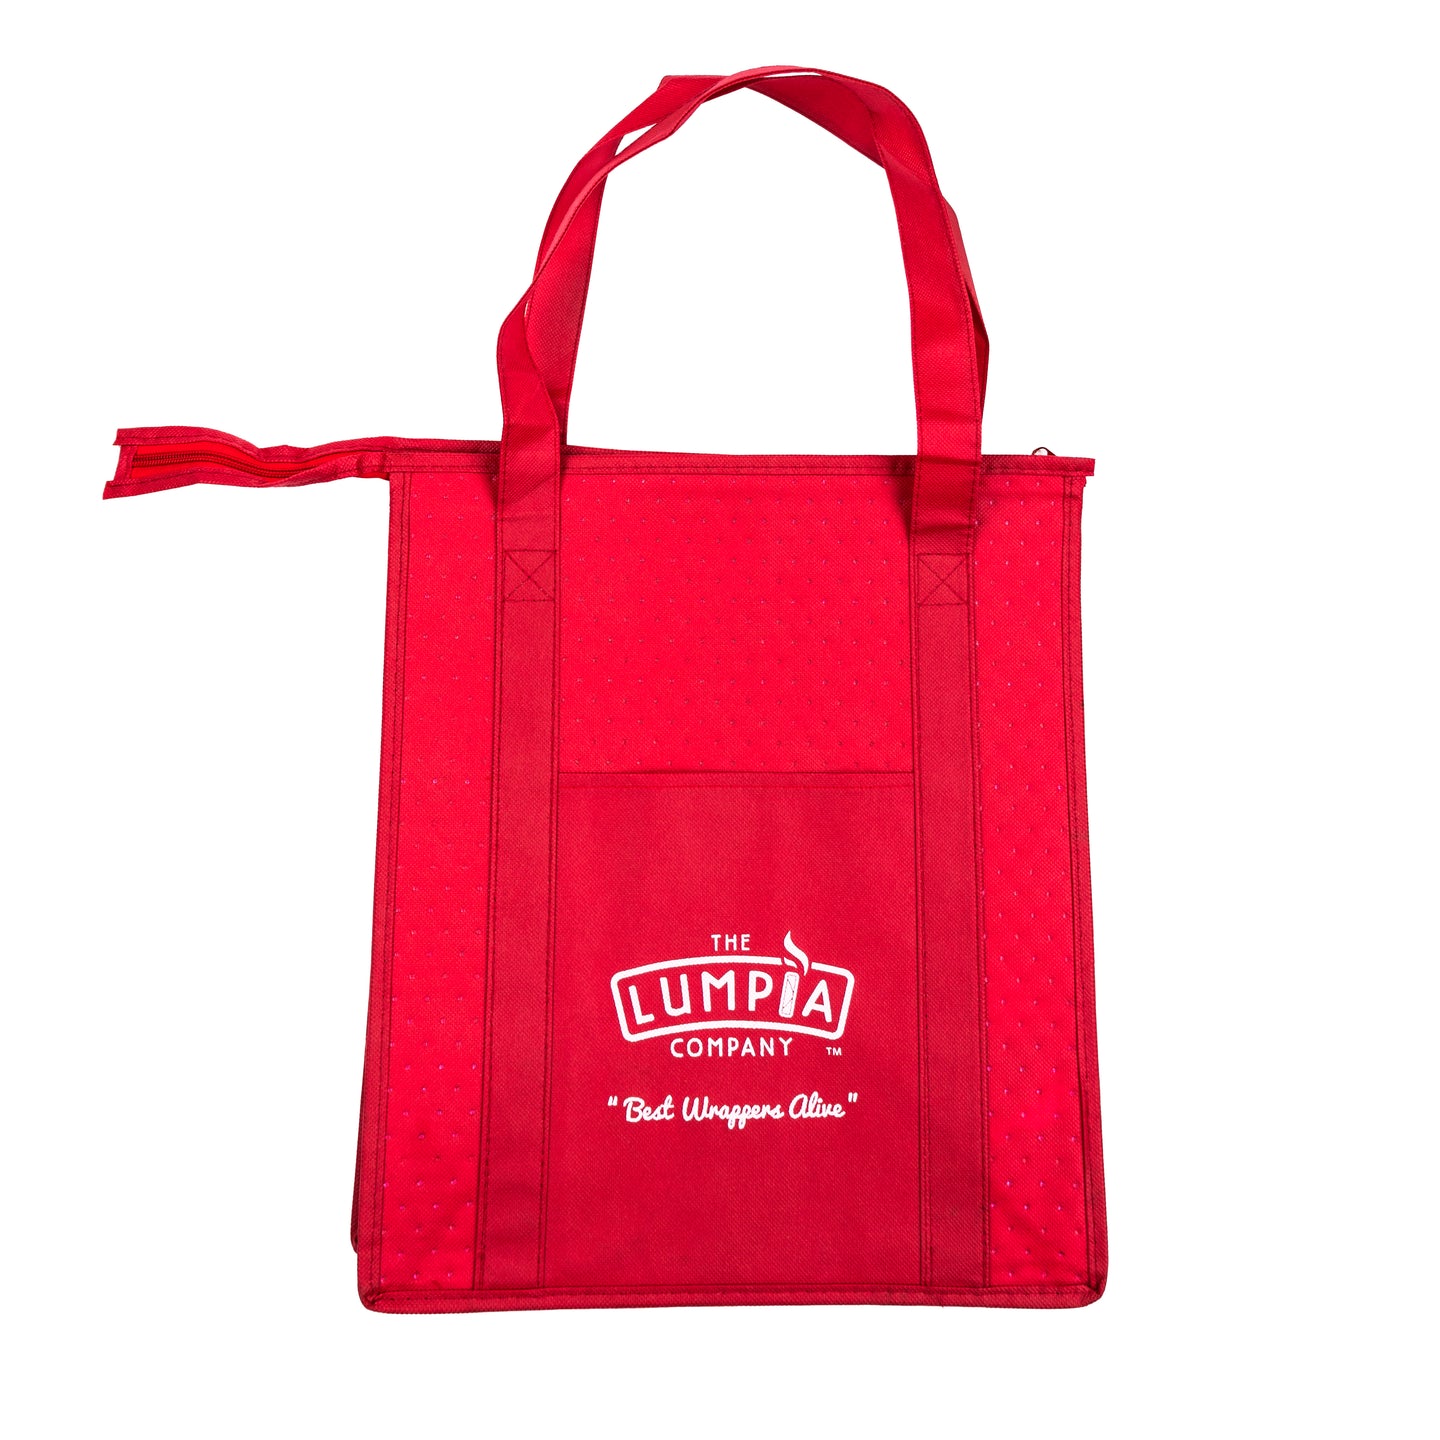 The Lumpia Company Red Insulated Bag